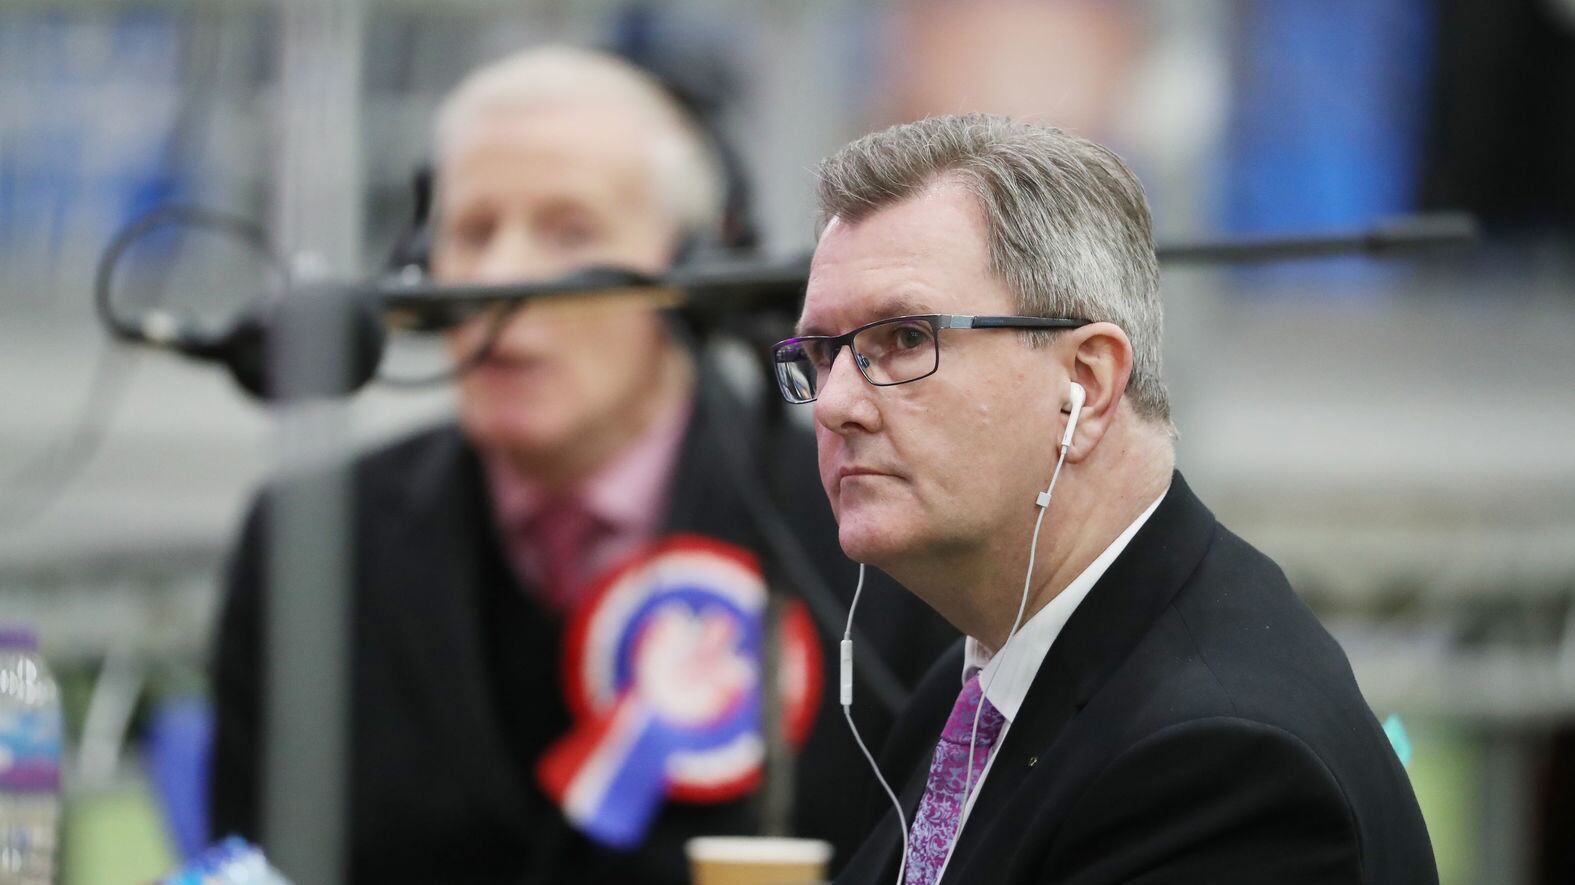 The DUP's Gregory Campbell and Jeffery Donaldson at Meadowbank Sports Arena in Magherafelt, Co Derry as counting begins Westminster election. Picture by Niall Carson/PA Wire&nbsp;